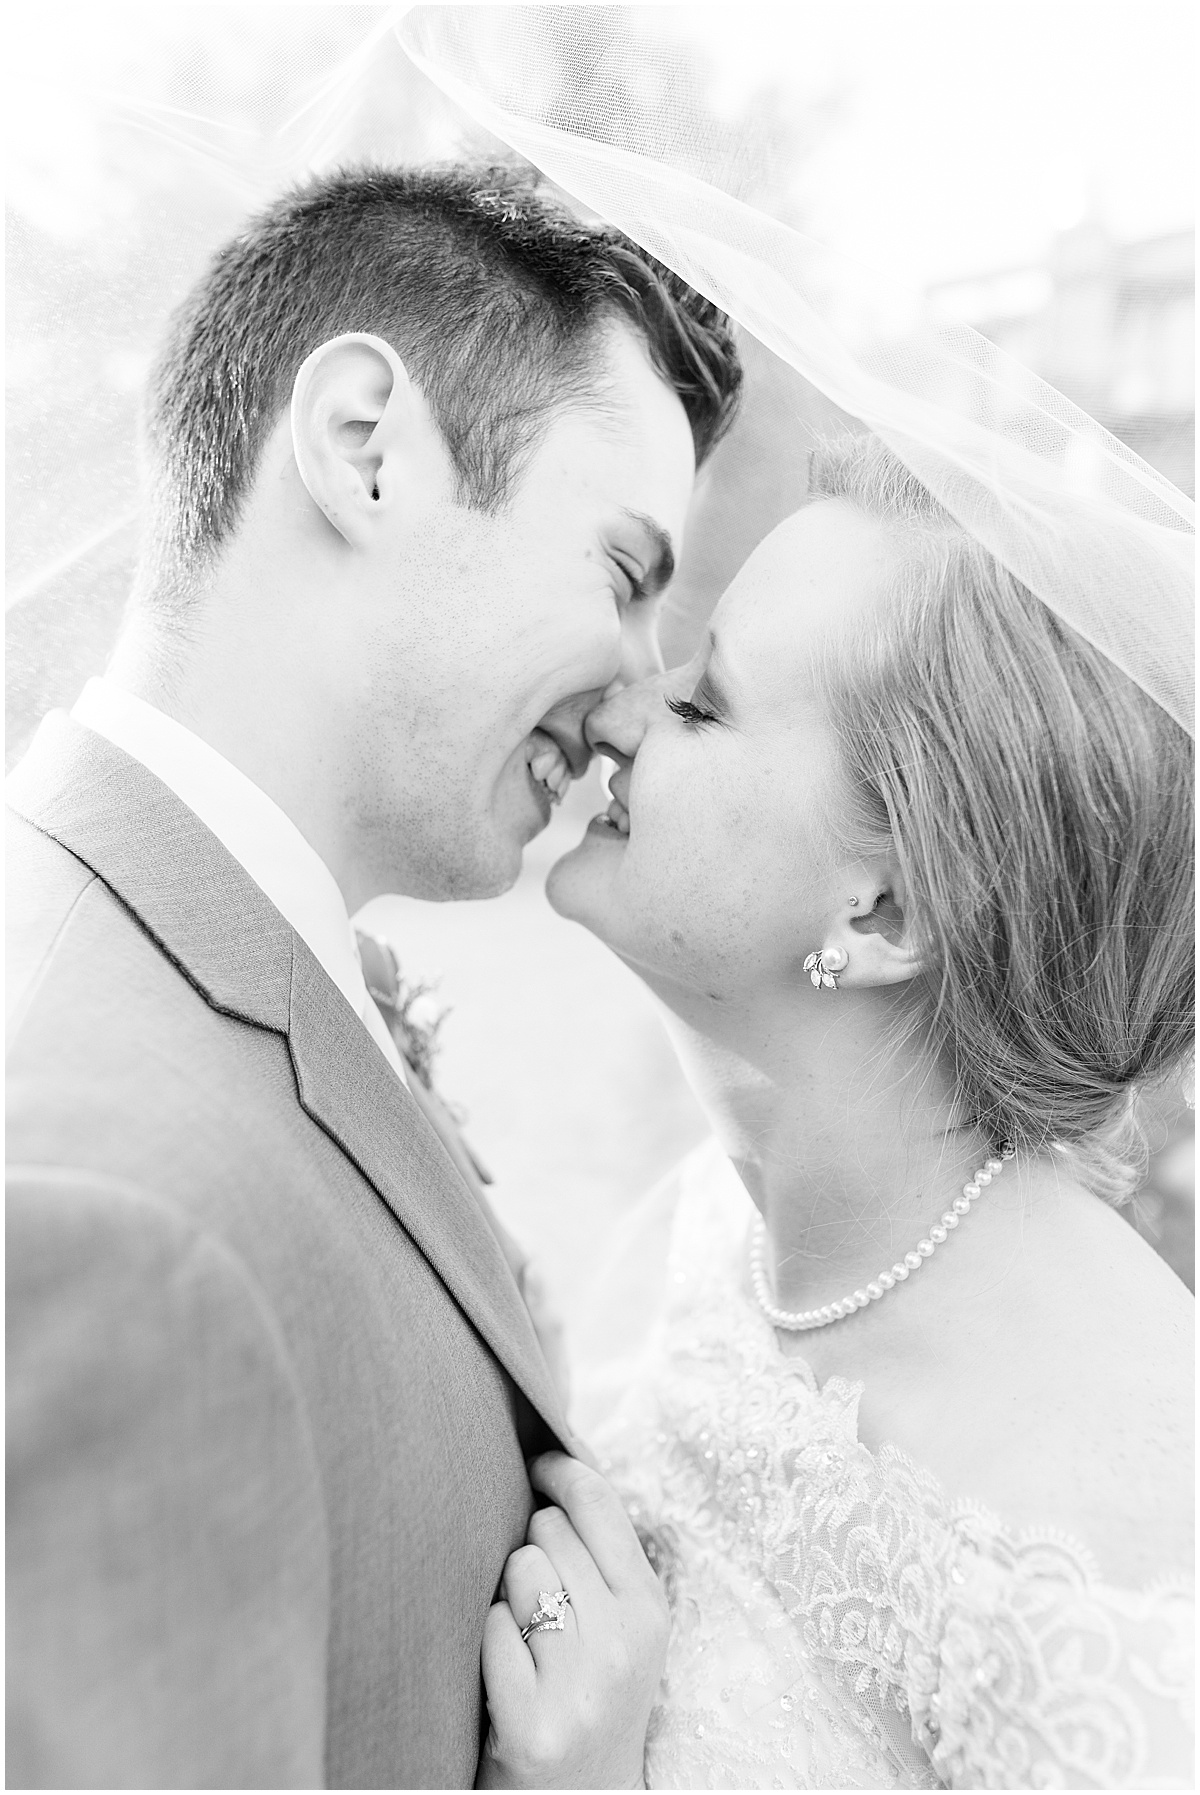 Bride and groom portrait at Traders Point Creamery wedding in Zionsville, Indiana